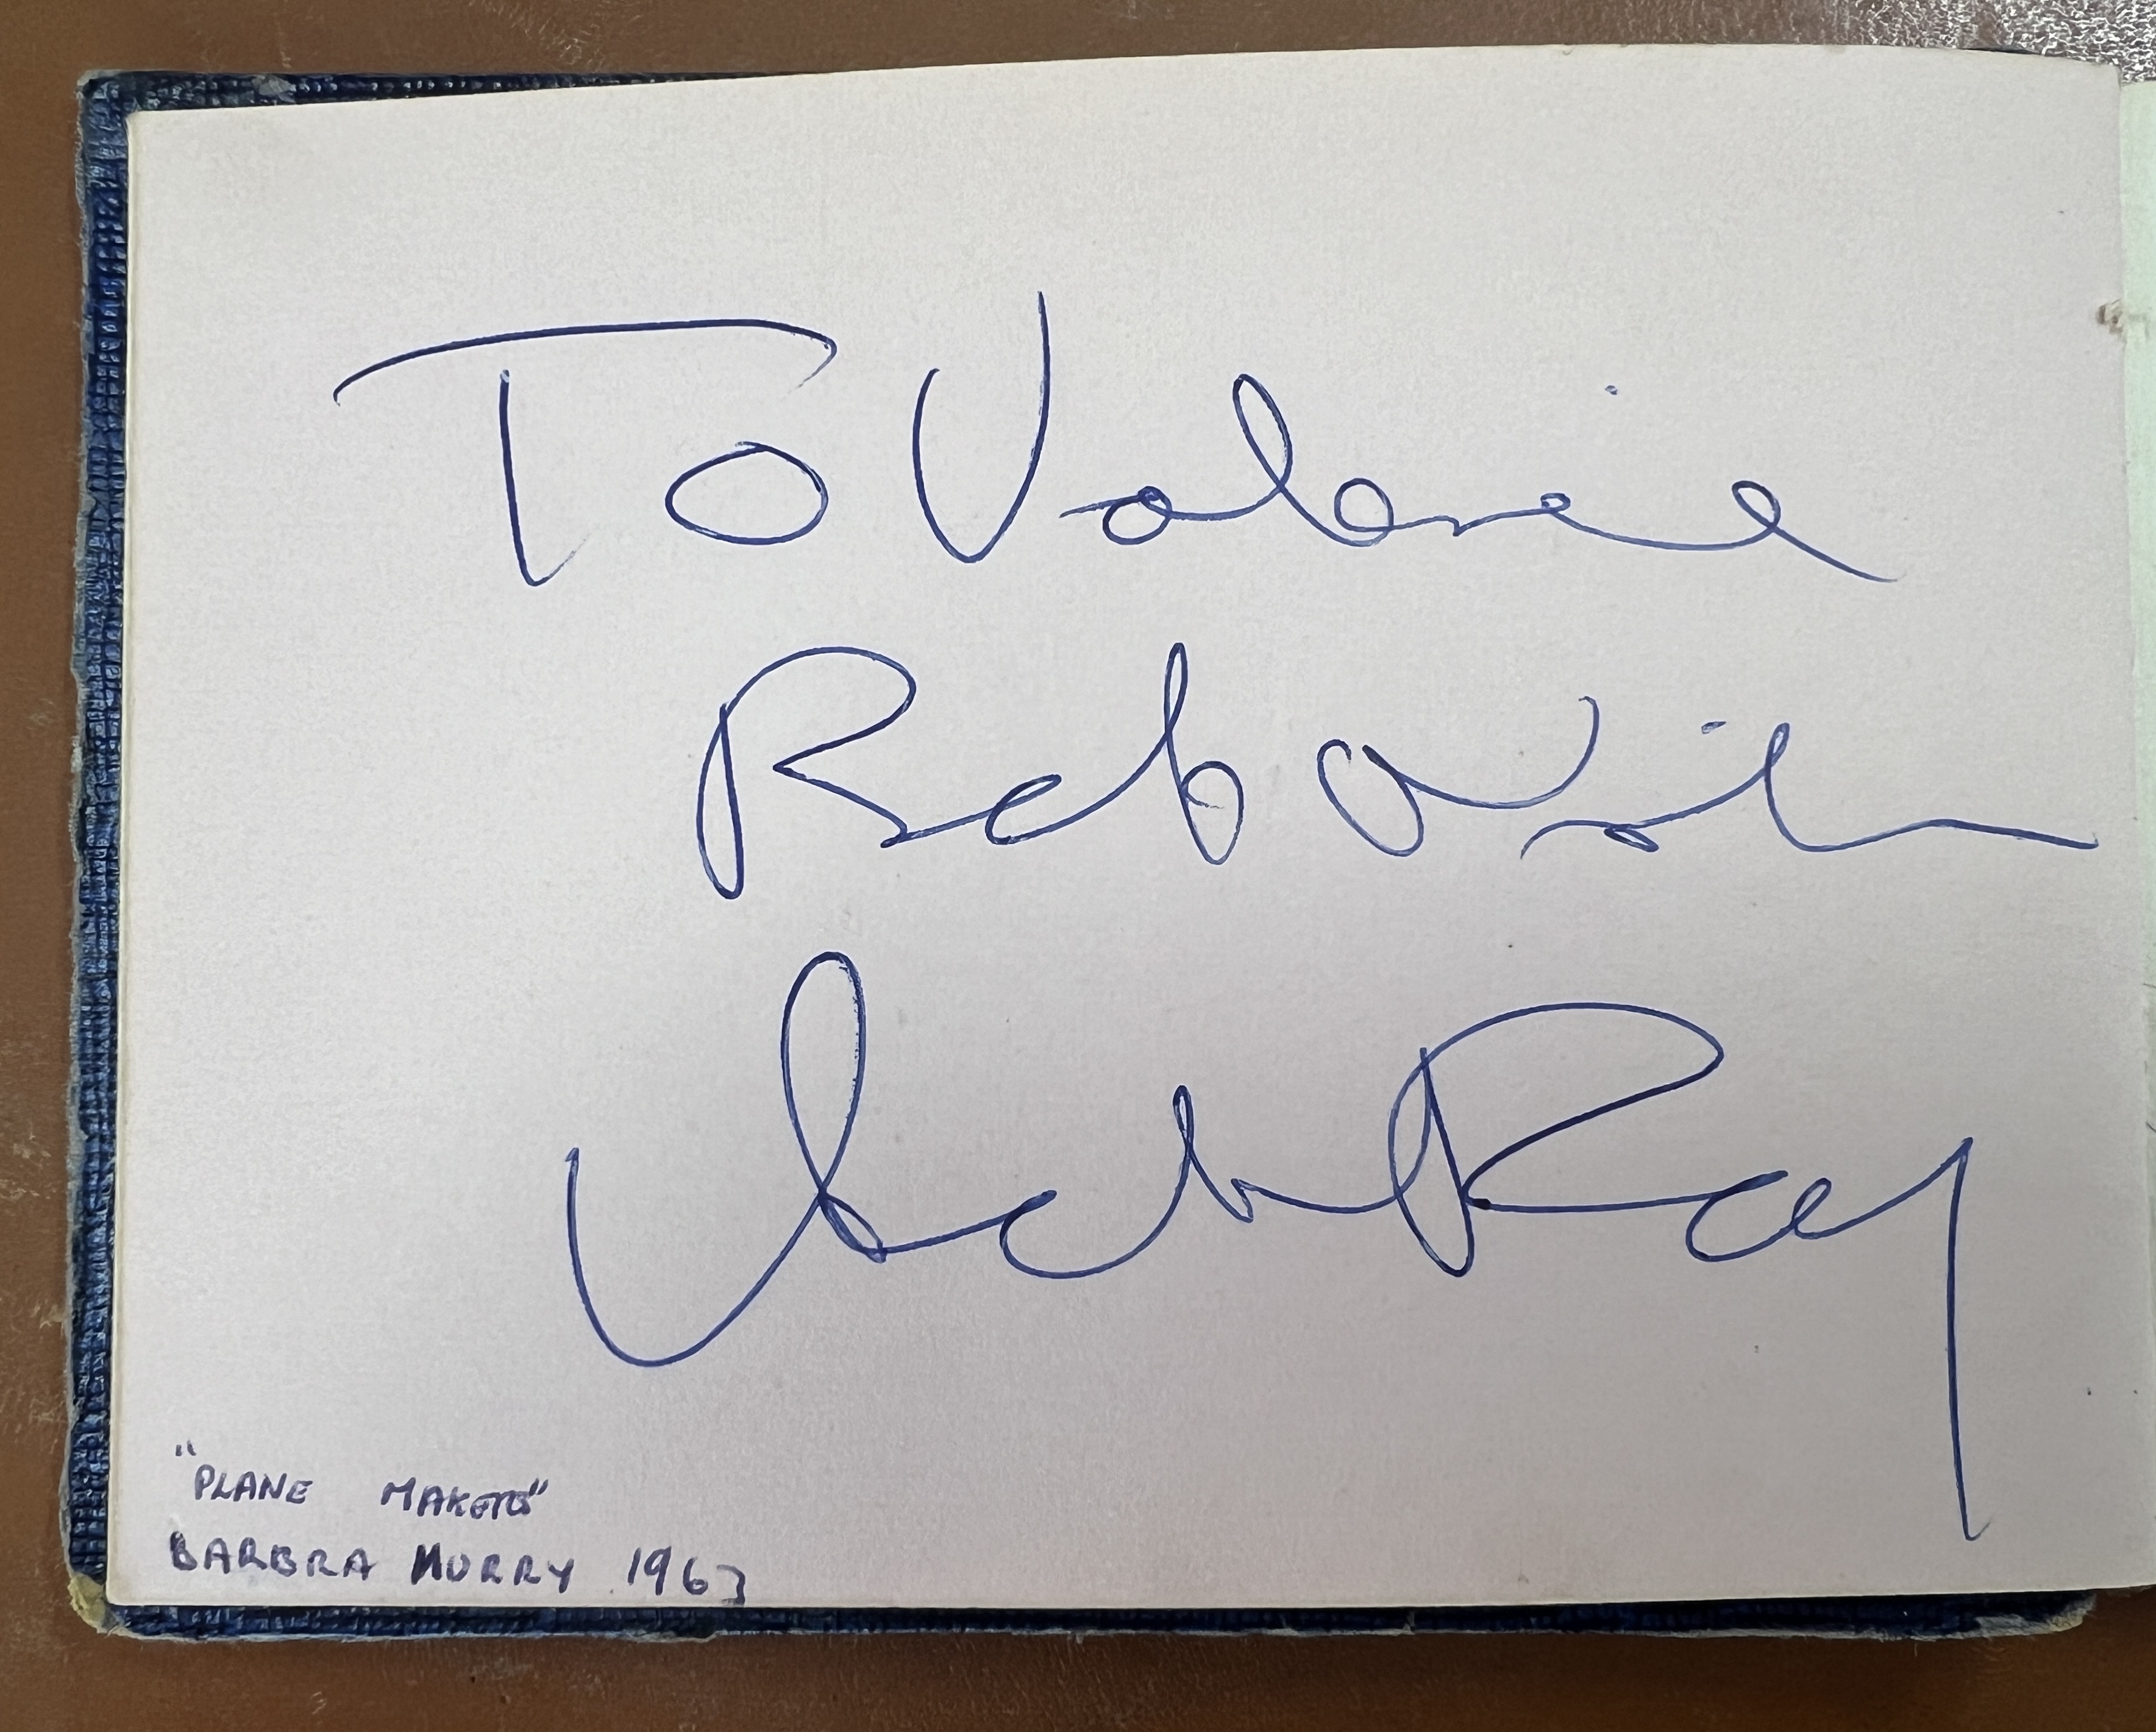 A 1960's autograph album containing autographs of various celebrities including Cliff Richard - Image 22 of 37